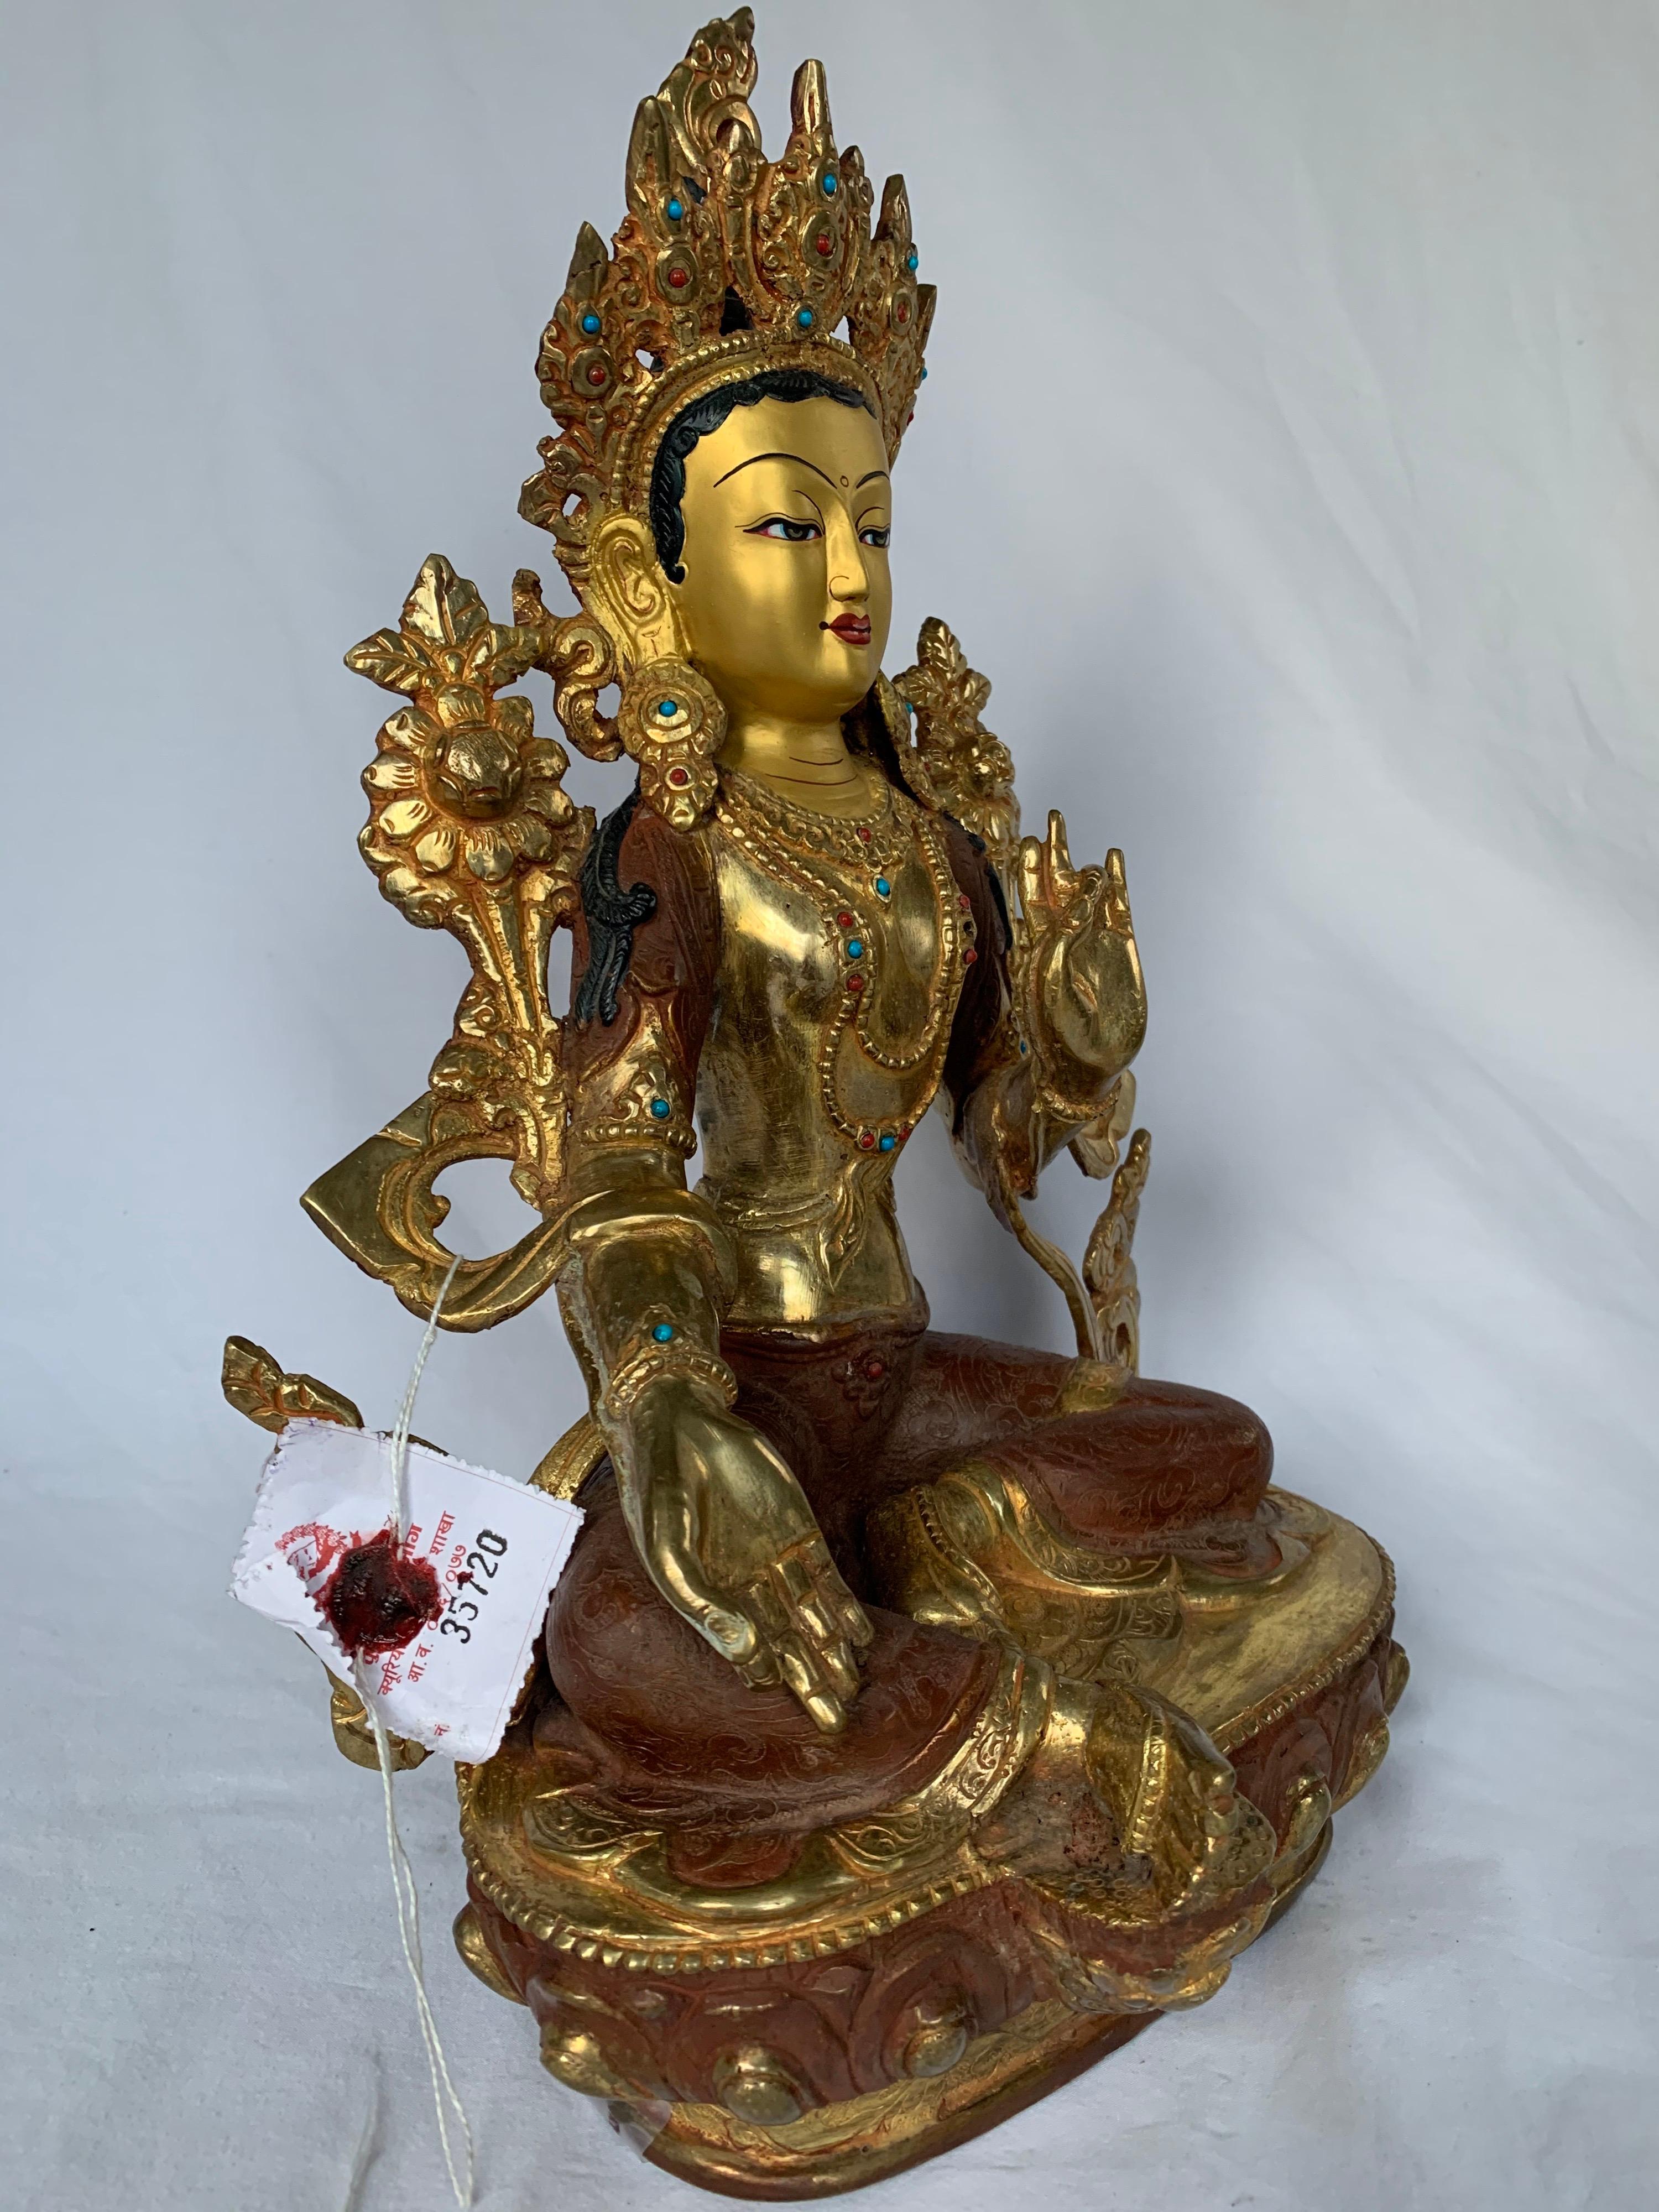 Green Tara Statue 12.5 Inch with 24K Gold Handcrafted by Lost Wax Process - Sculpture by Unknown